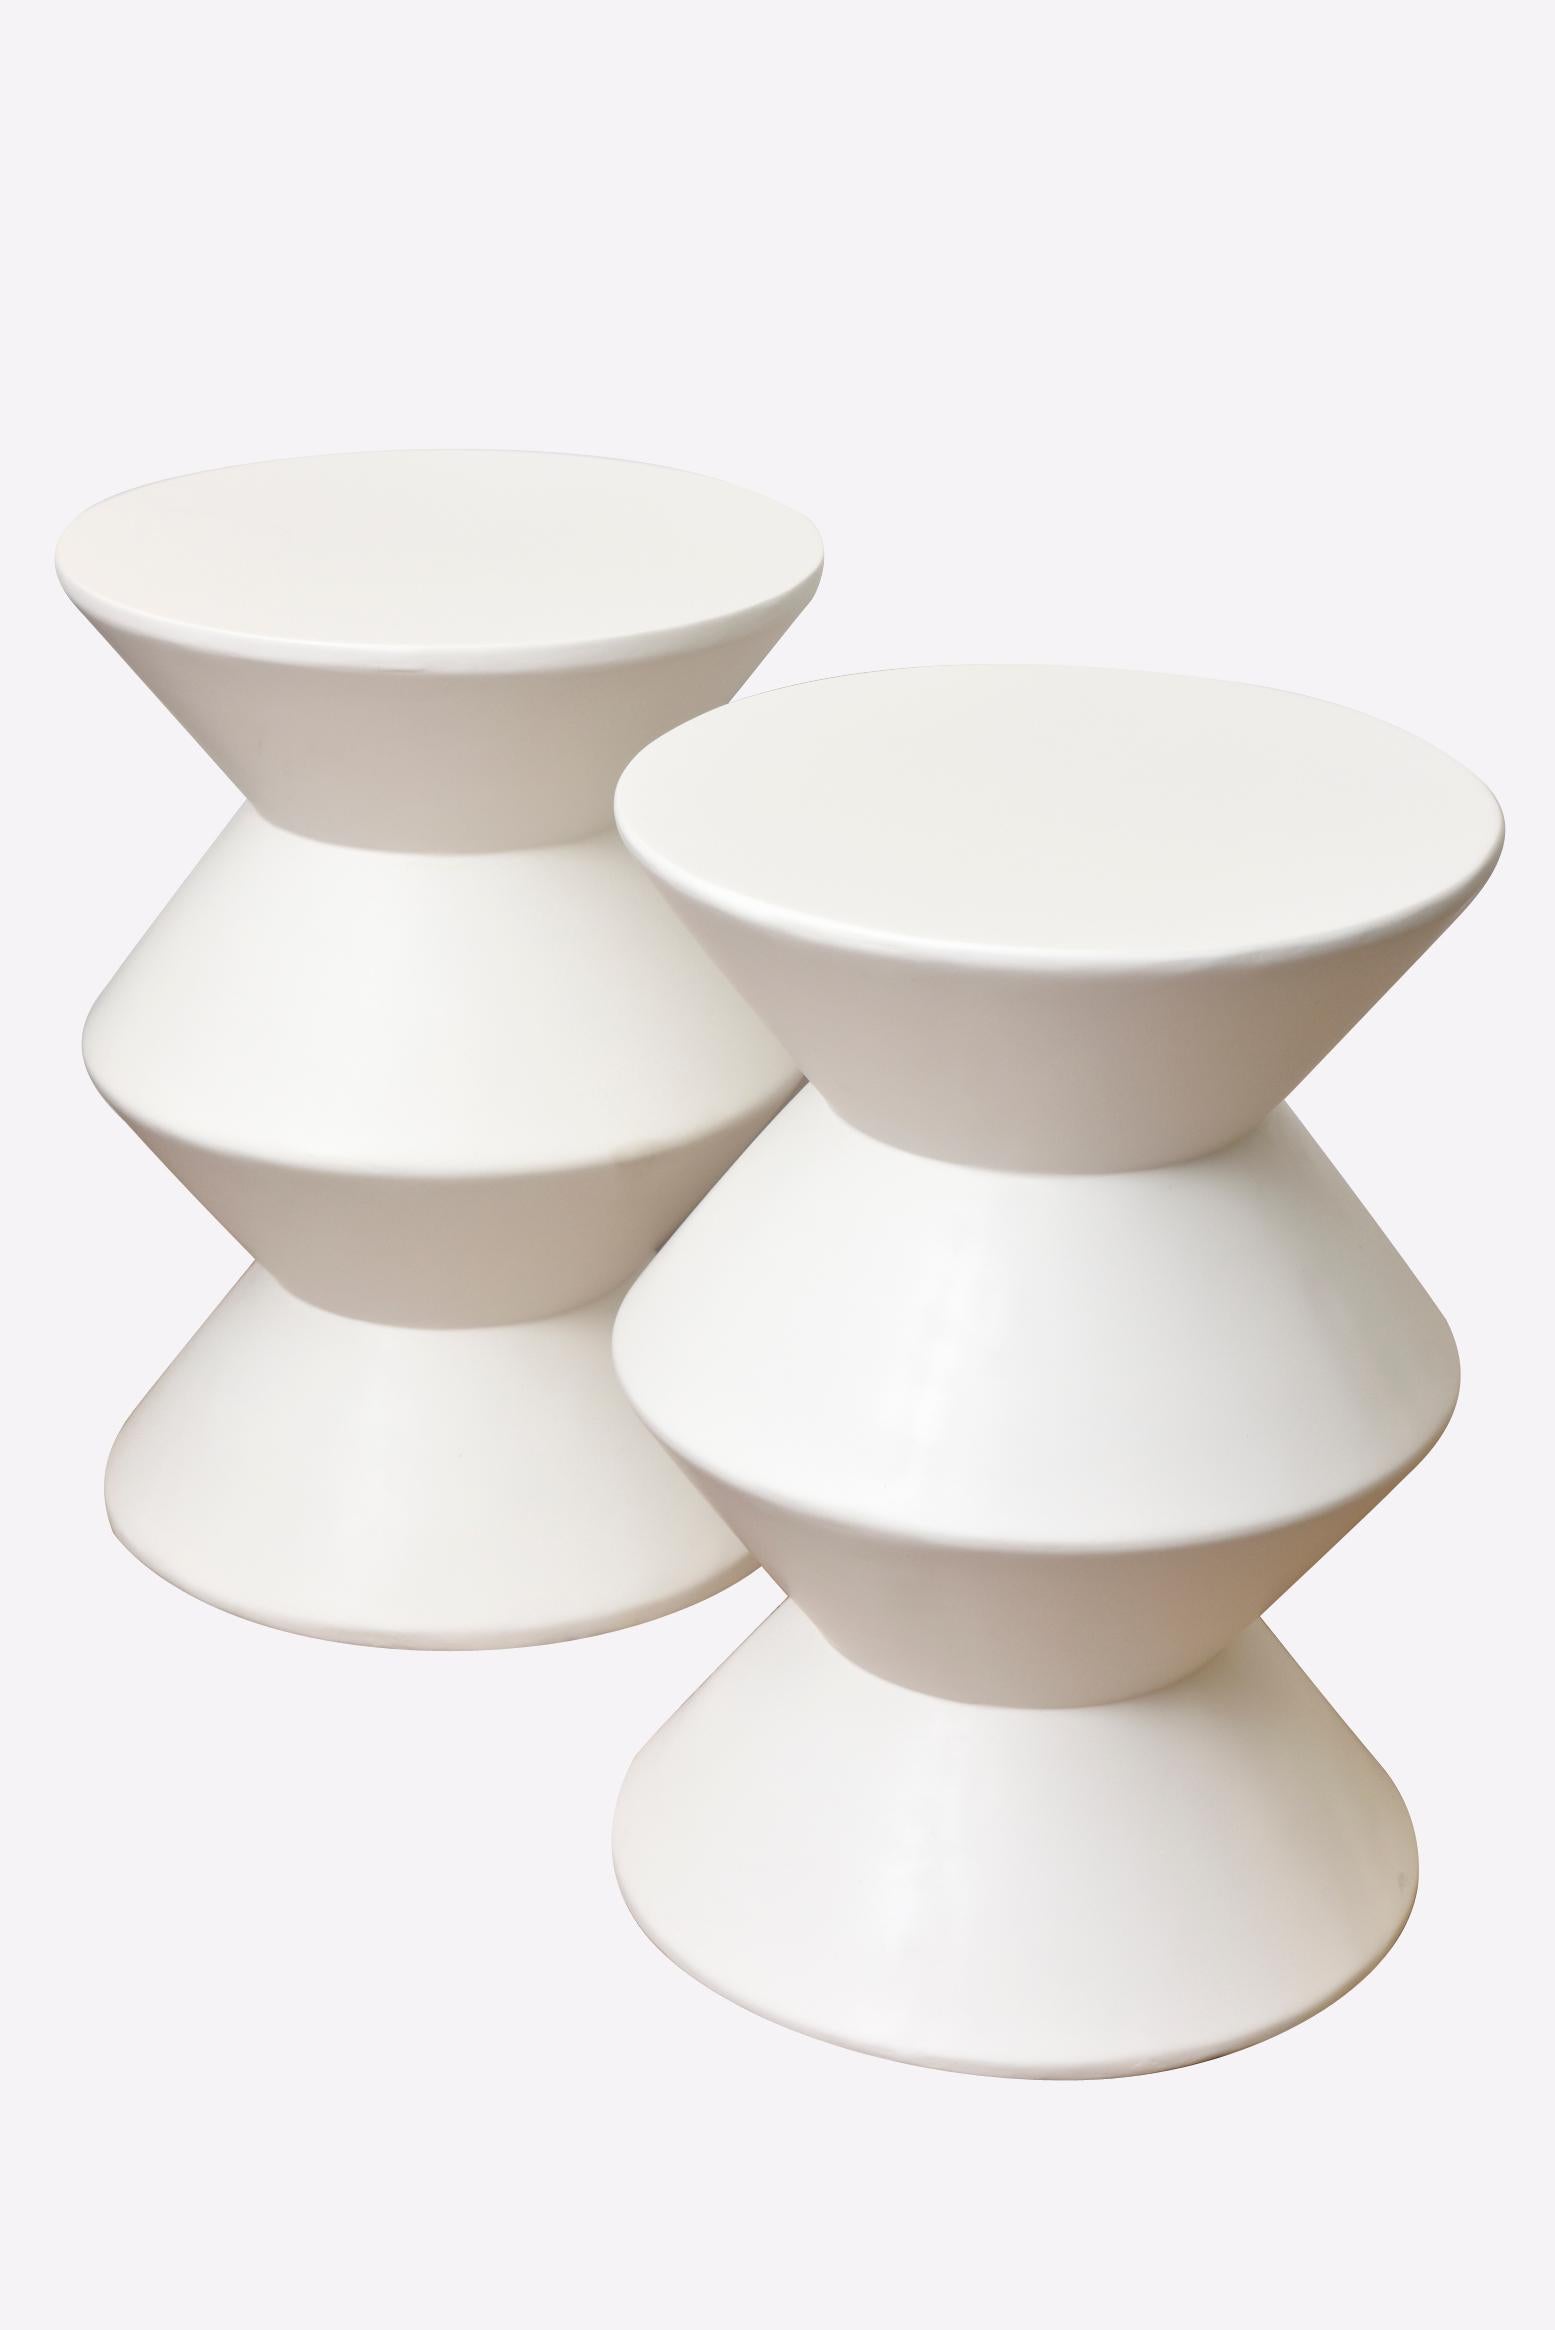 These amazing and rare modernist sculptural tiered white vintage Sirmos plaster of paris side tables are beyond chic! They are from the 1970s.
They have a John Dickinson style meets Sirmos in a sculptural manner. They are modernist and sculptural.